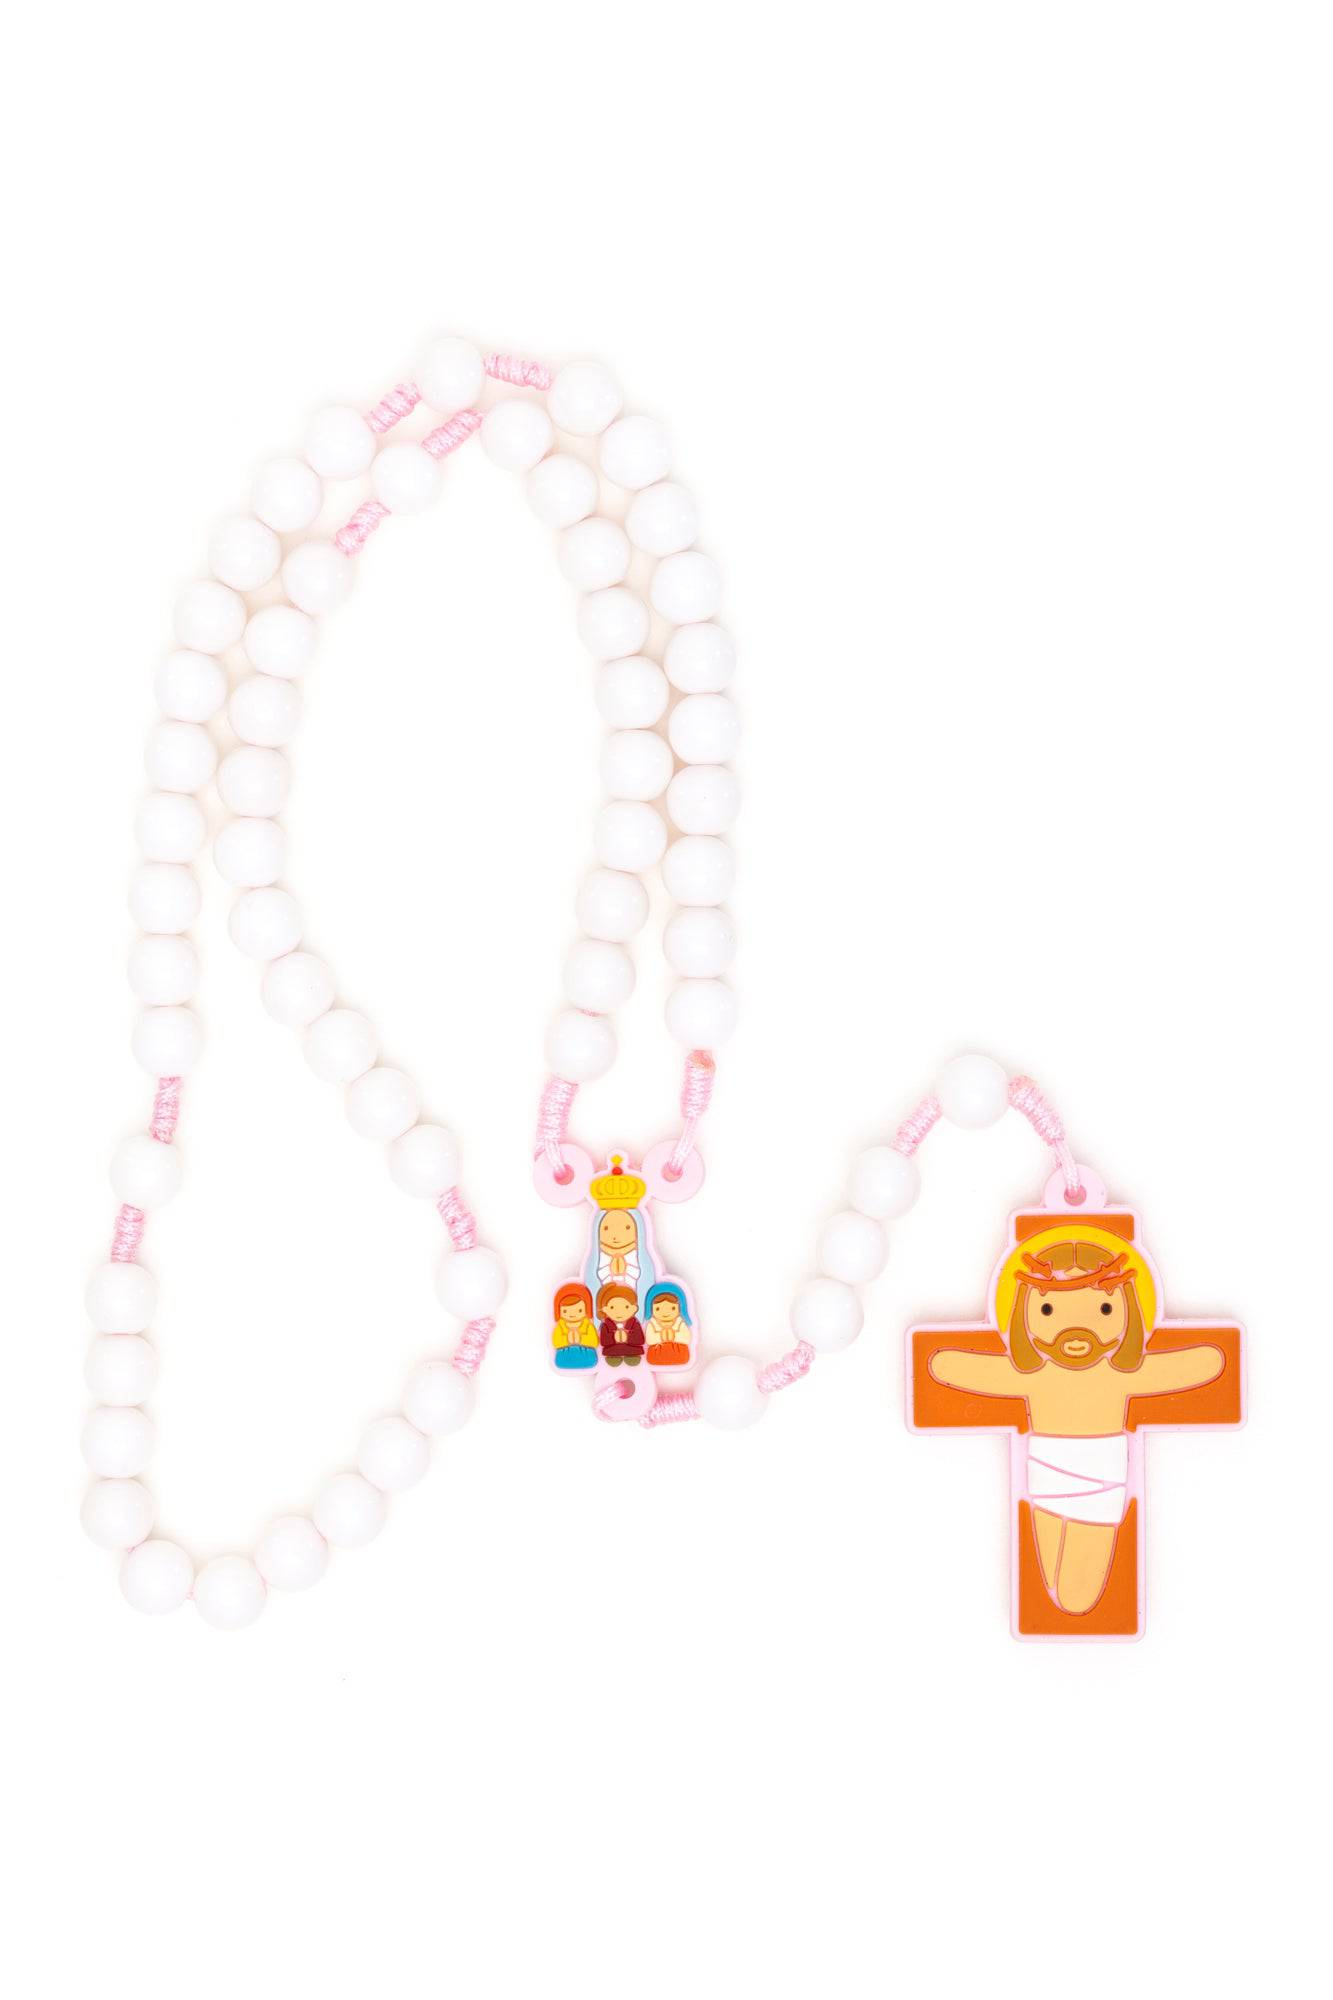 Lady of Fatima Apparition Pink Rosary - Little Drops of Water